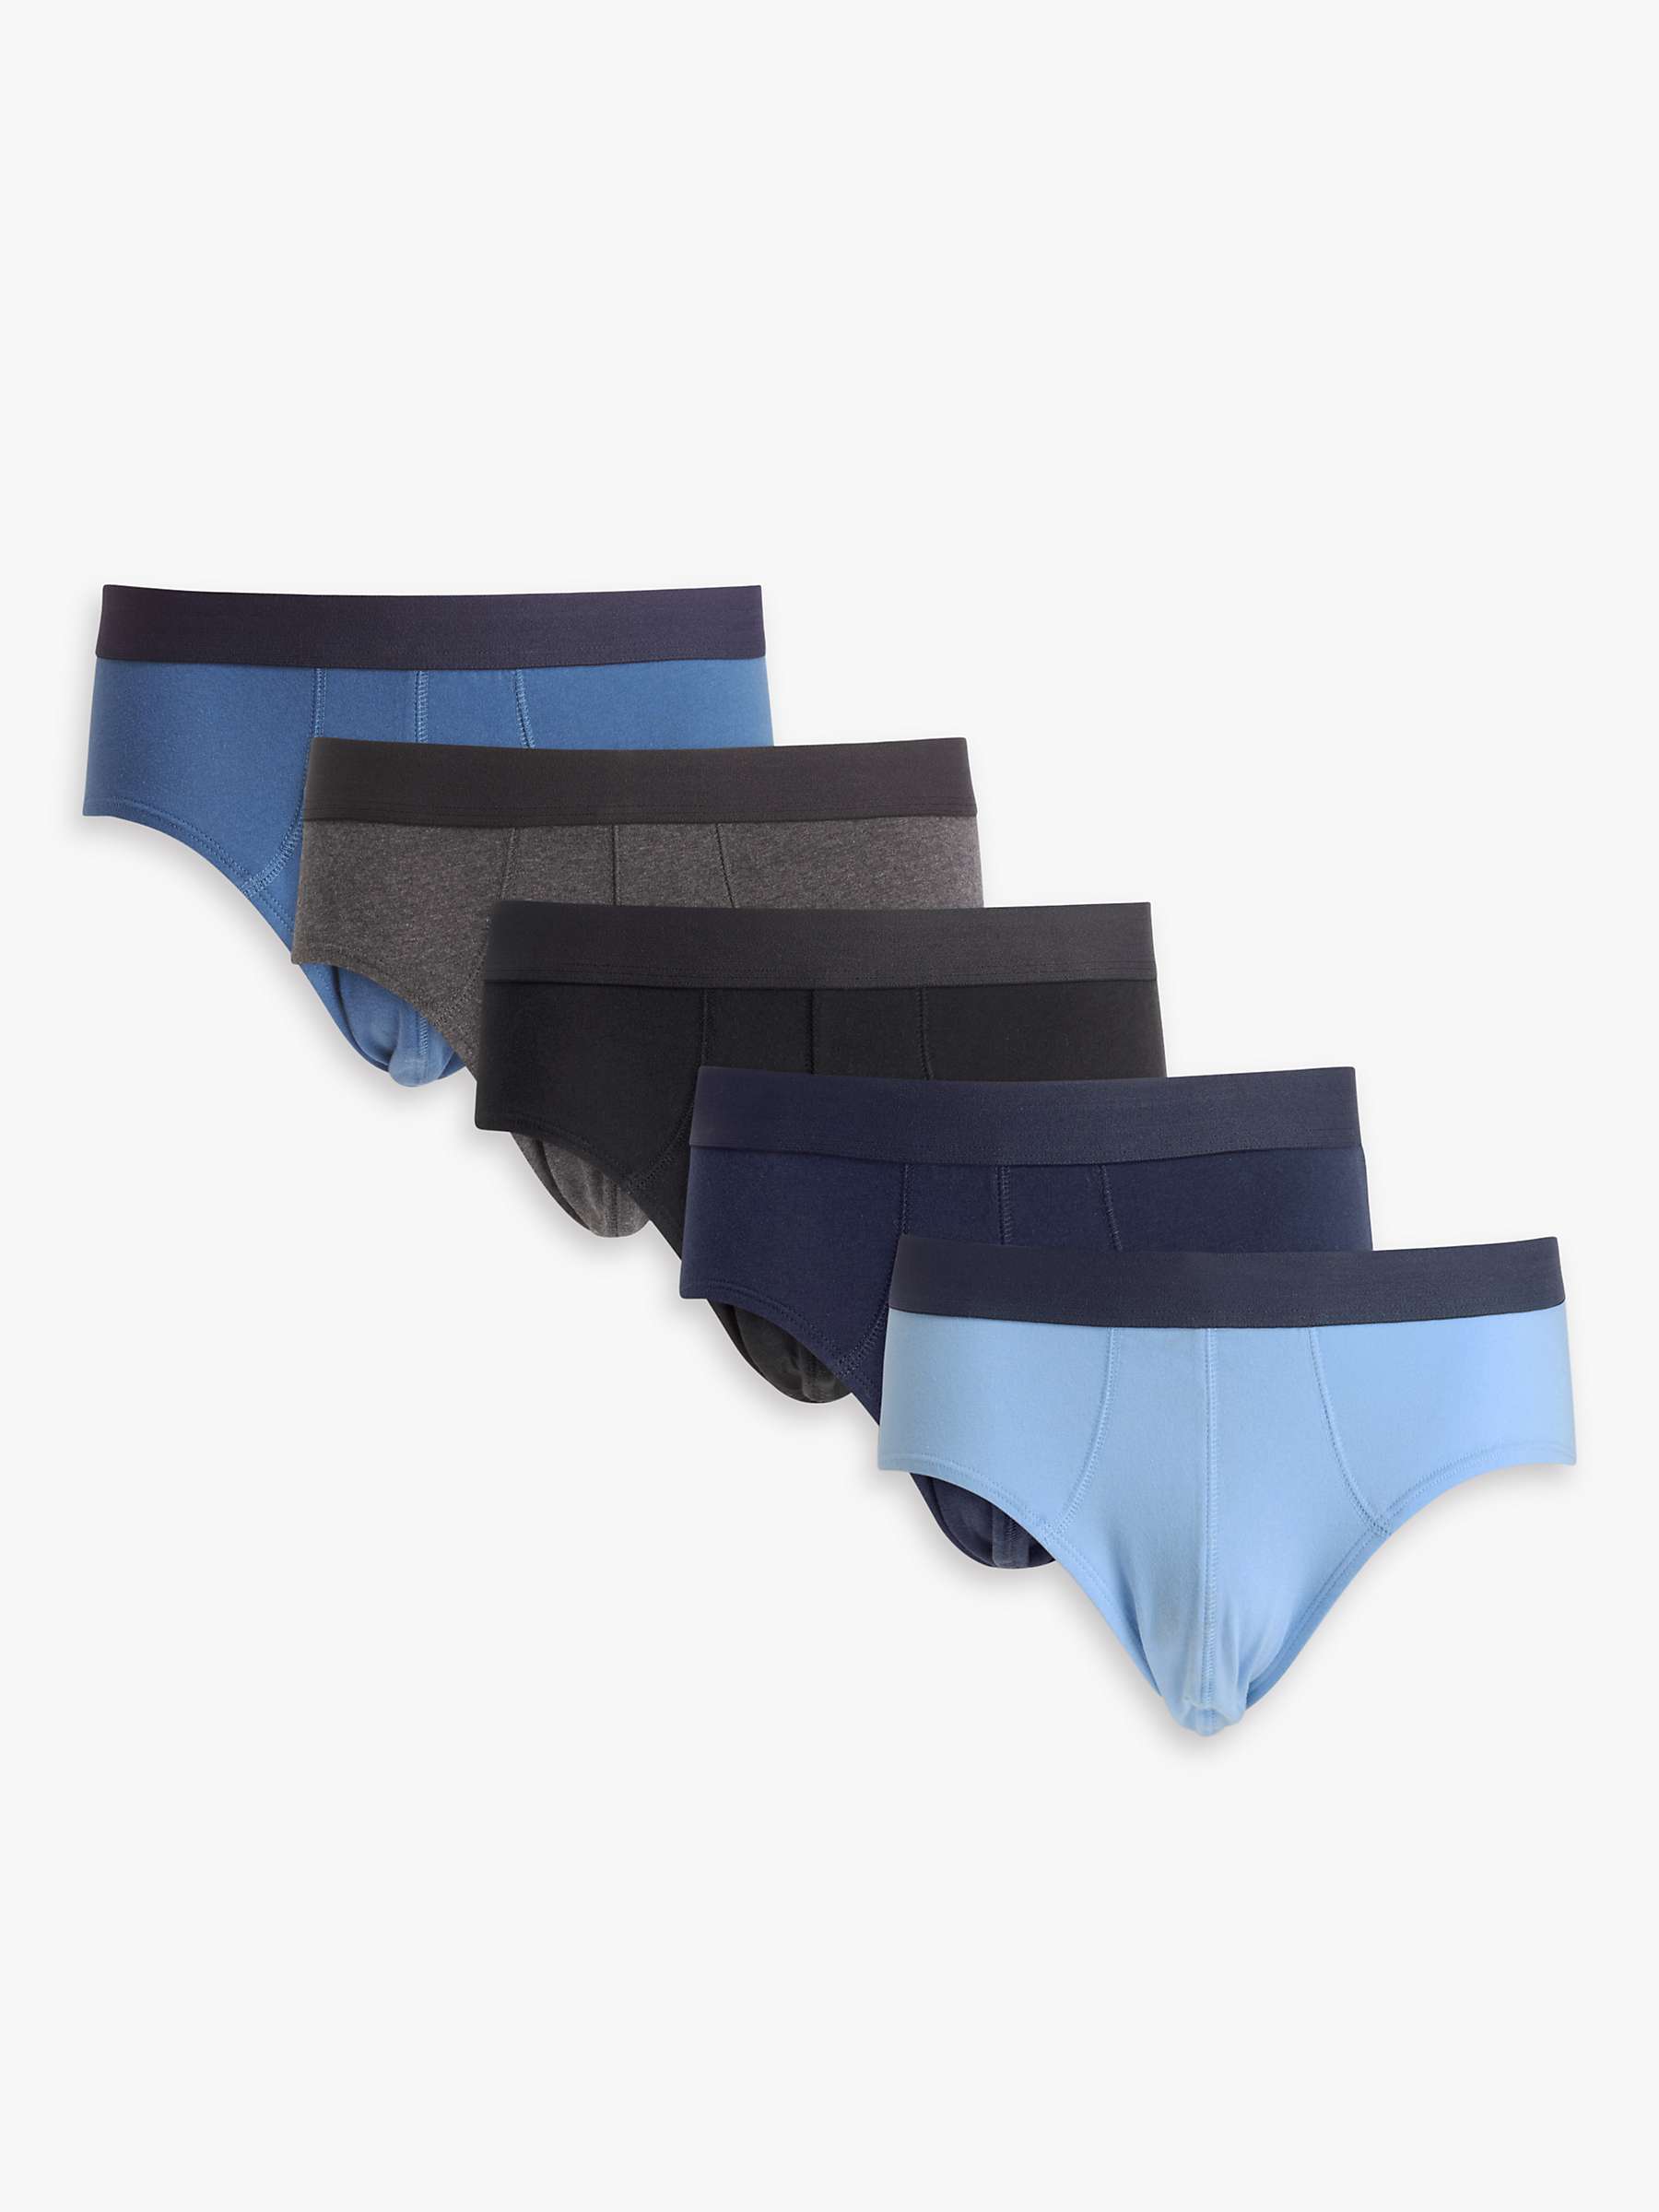 Buy John Lewis ANYDAY Stretch Cotton Briefs, Pack of 5, Blue Online at johnlewis.com